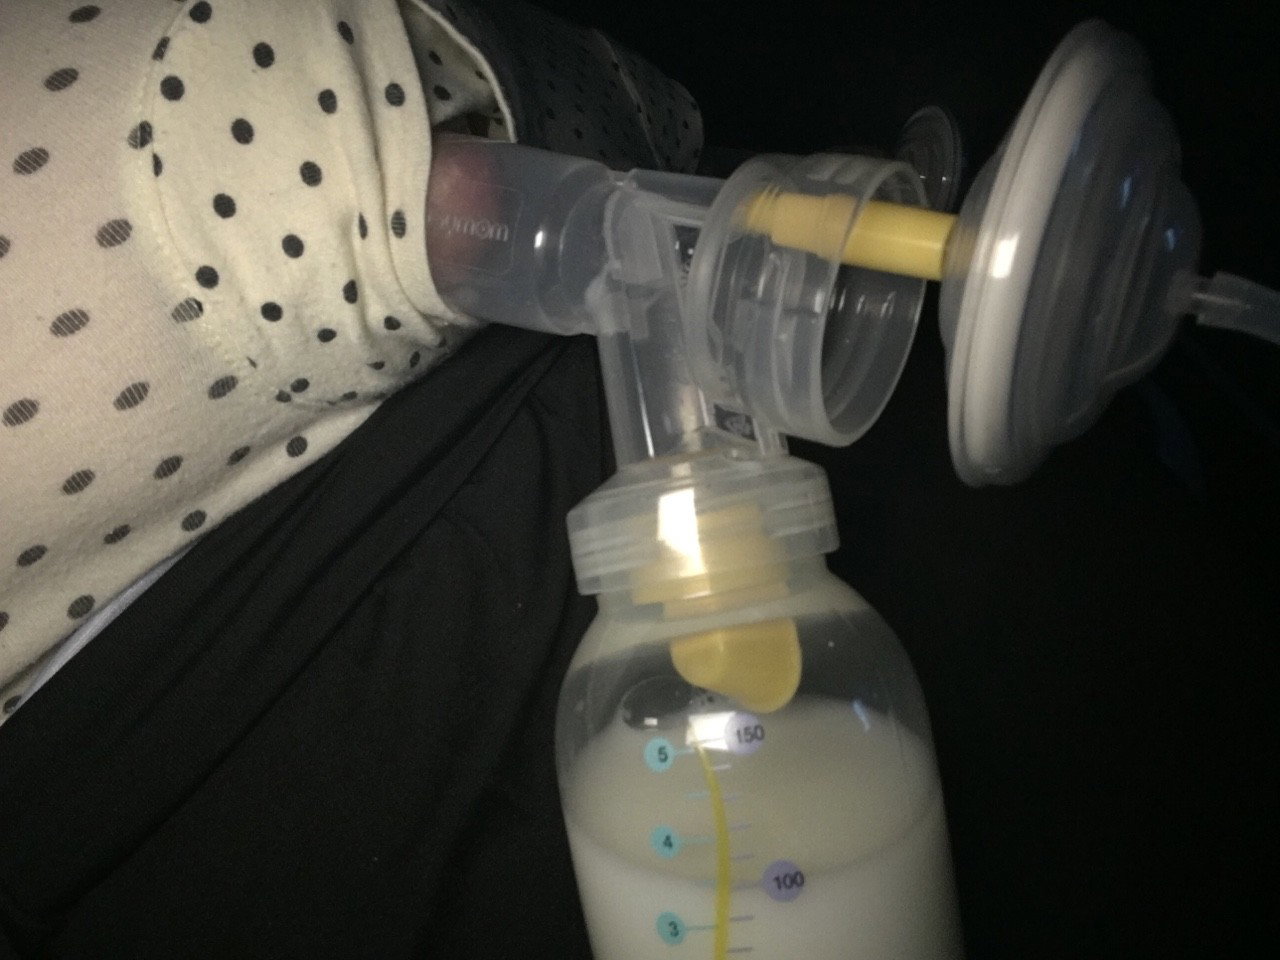 Watch the Photo by preggoalways with the username @preggoalways, posted on March 1, 2017 and the text says 'I don’t usually pump but I was asked too by the IP (intended parents) and it’s going pretty well #milking  #nursing  #bra  #pumping  #pumping  #bra  #lactation  #lactating  #lactating  #girl  #hucow  #hucow  #life  #lactation  #fetish  #breastfeeding..'